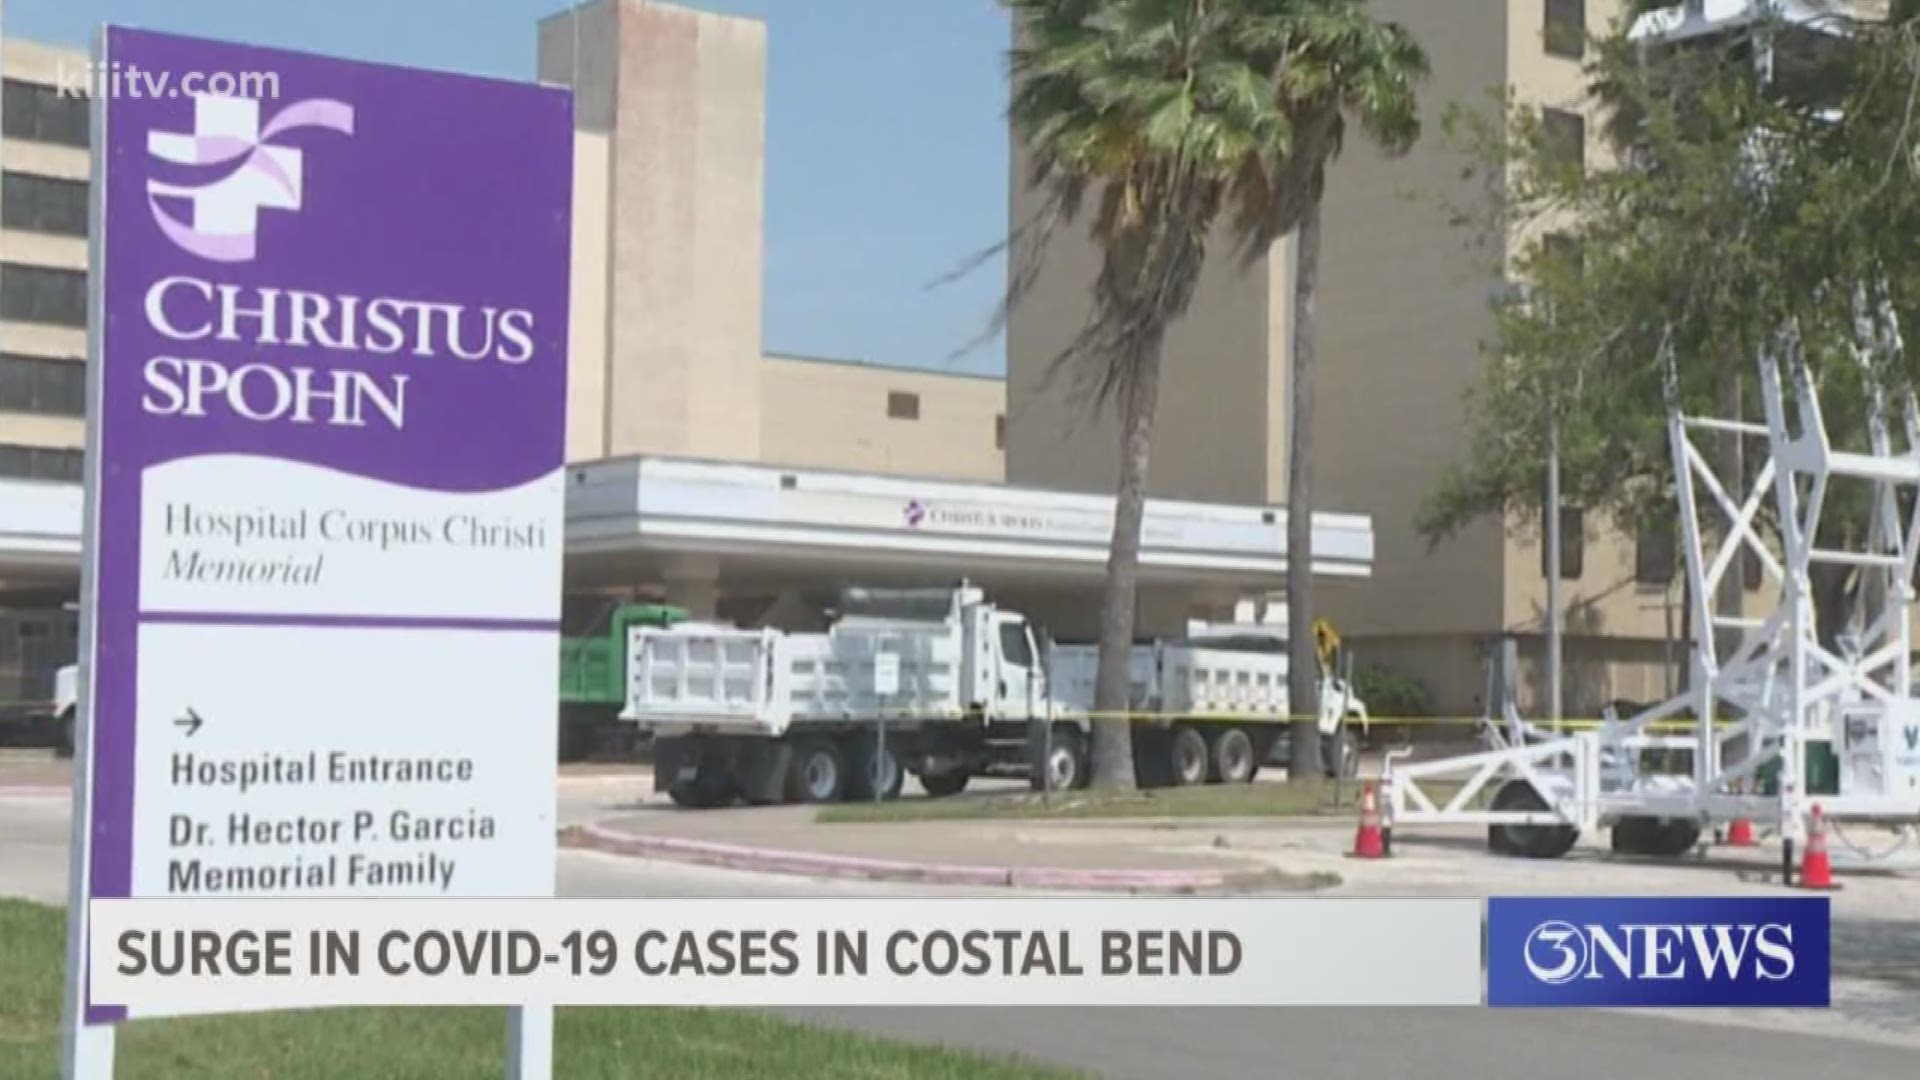 Hospitals in the Coastal Bend may need to prepare for a surge in patients.